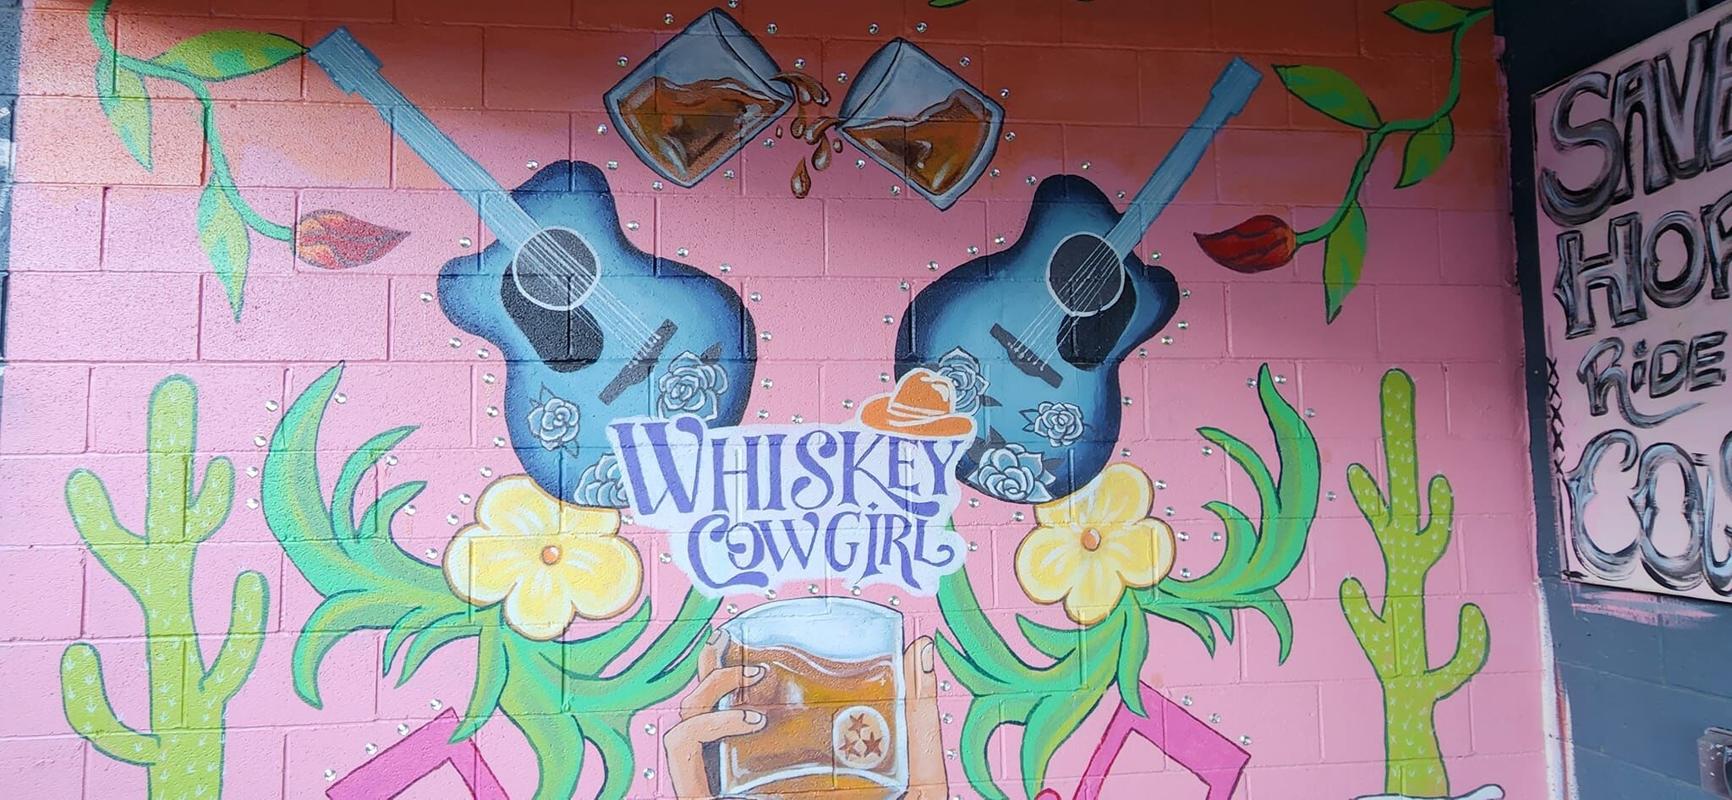 Chattanoogas Whiskey Cowgirl Officially Opens Its Doors Local News 